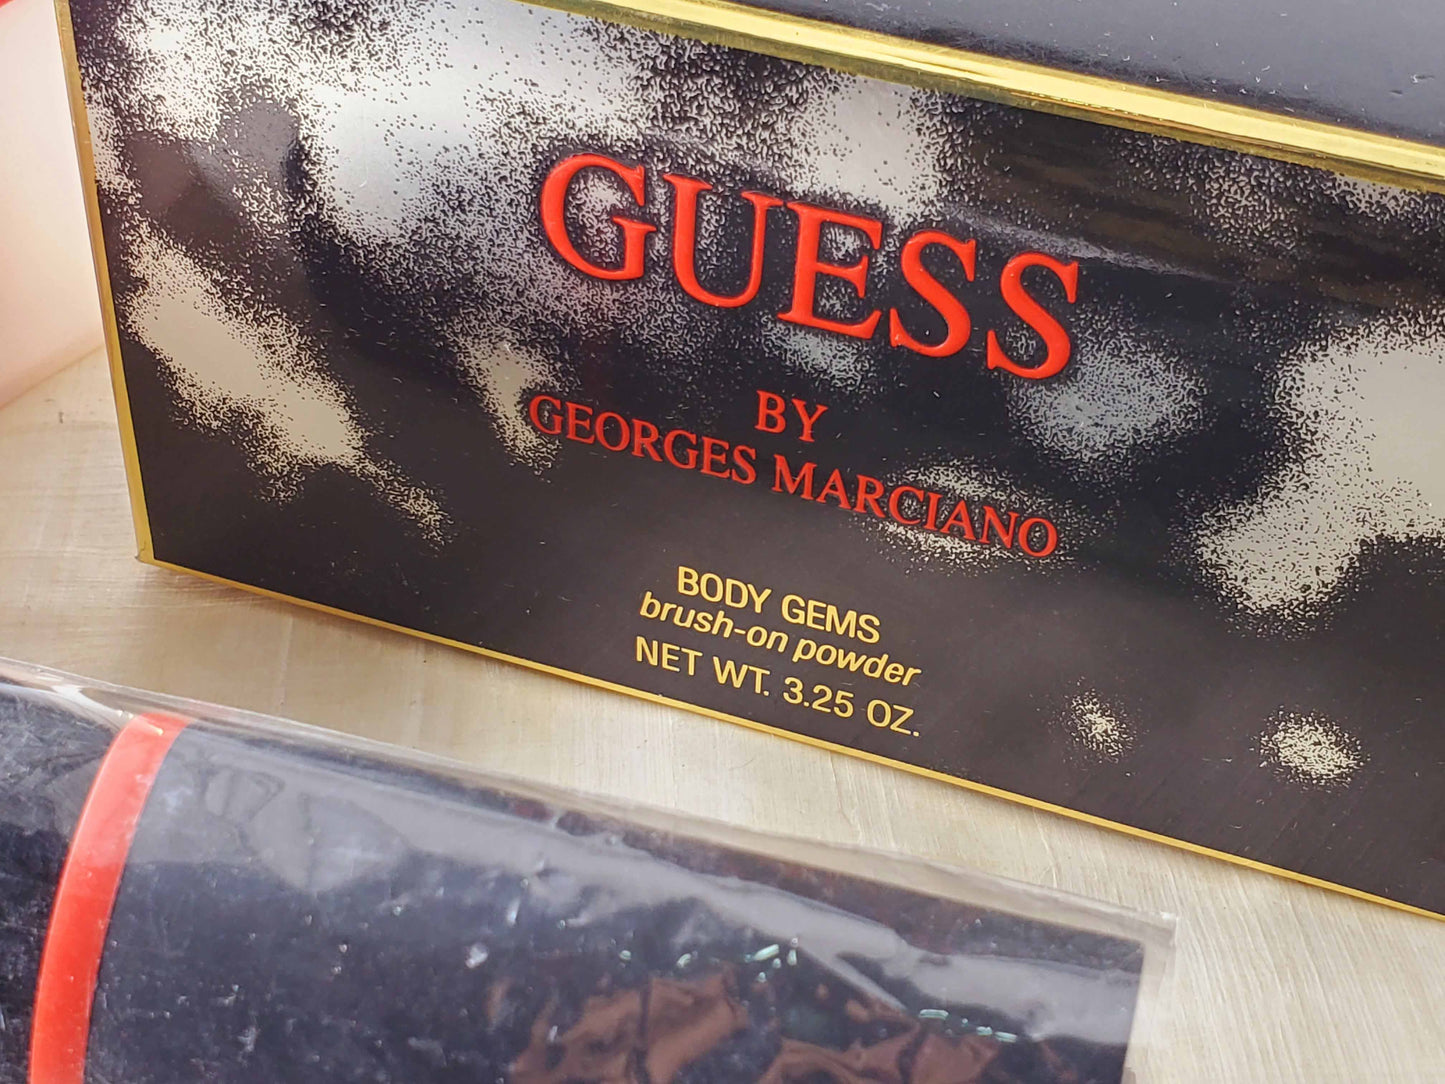 Guess by Georges Marciano Body Gems 97.5 ml 3.25 oz, Vintage, Rare